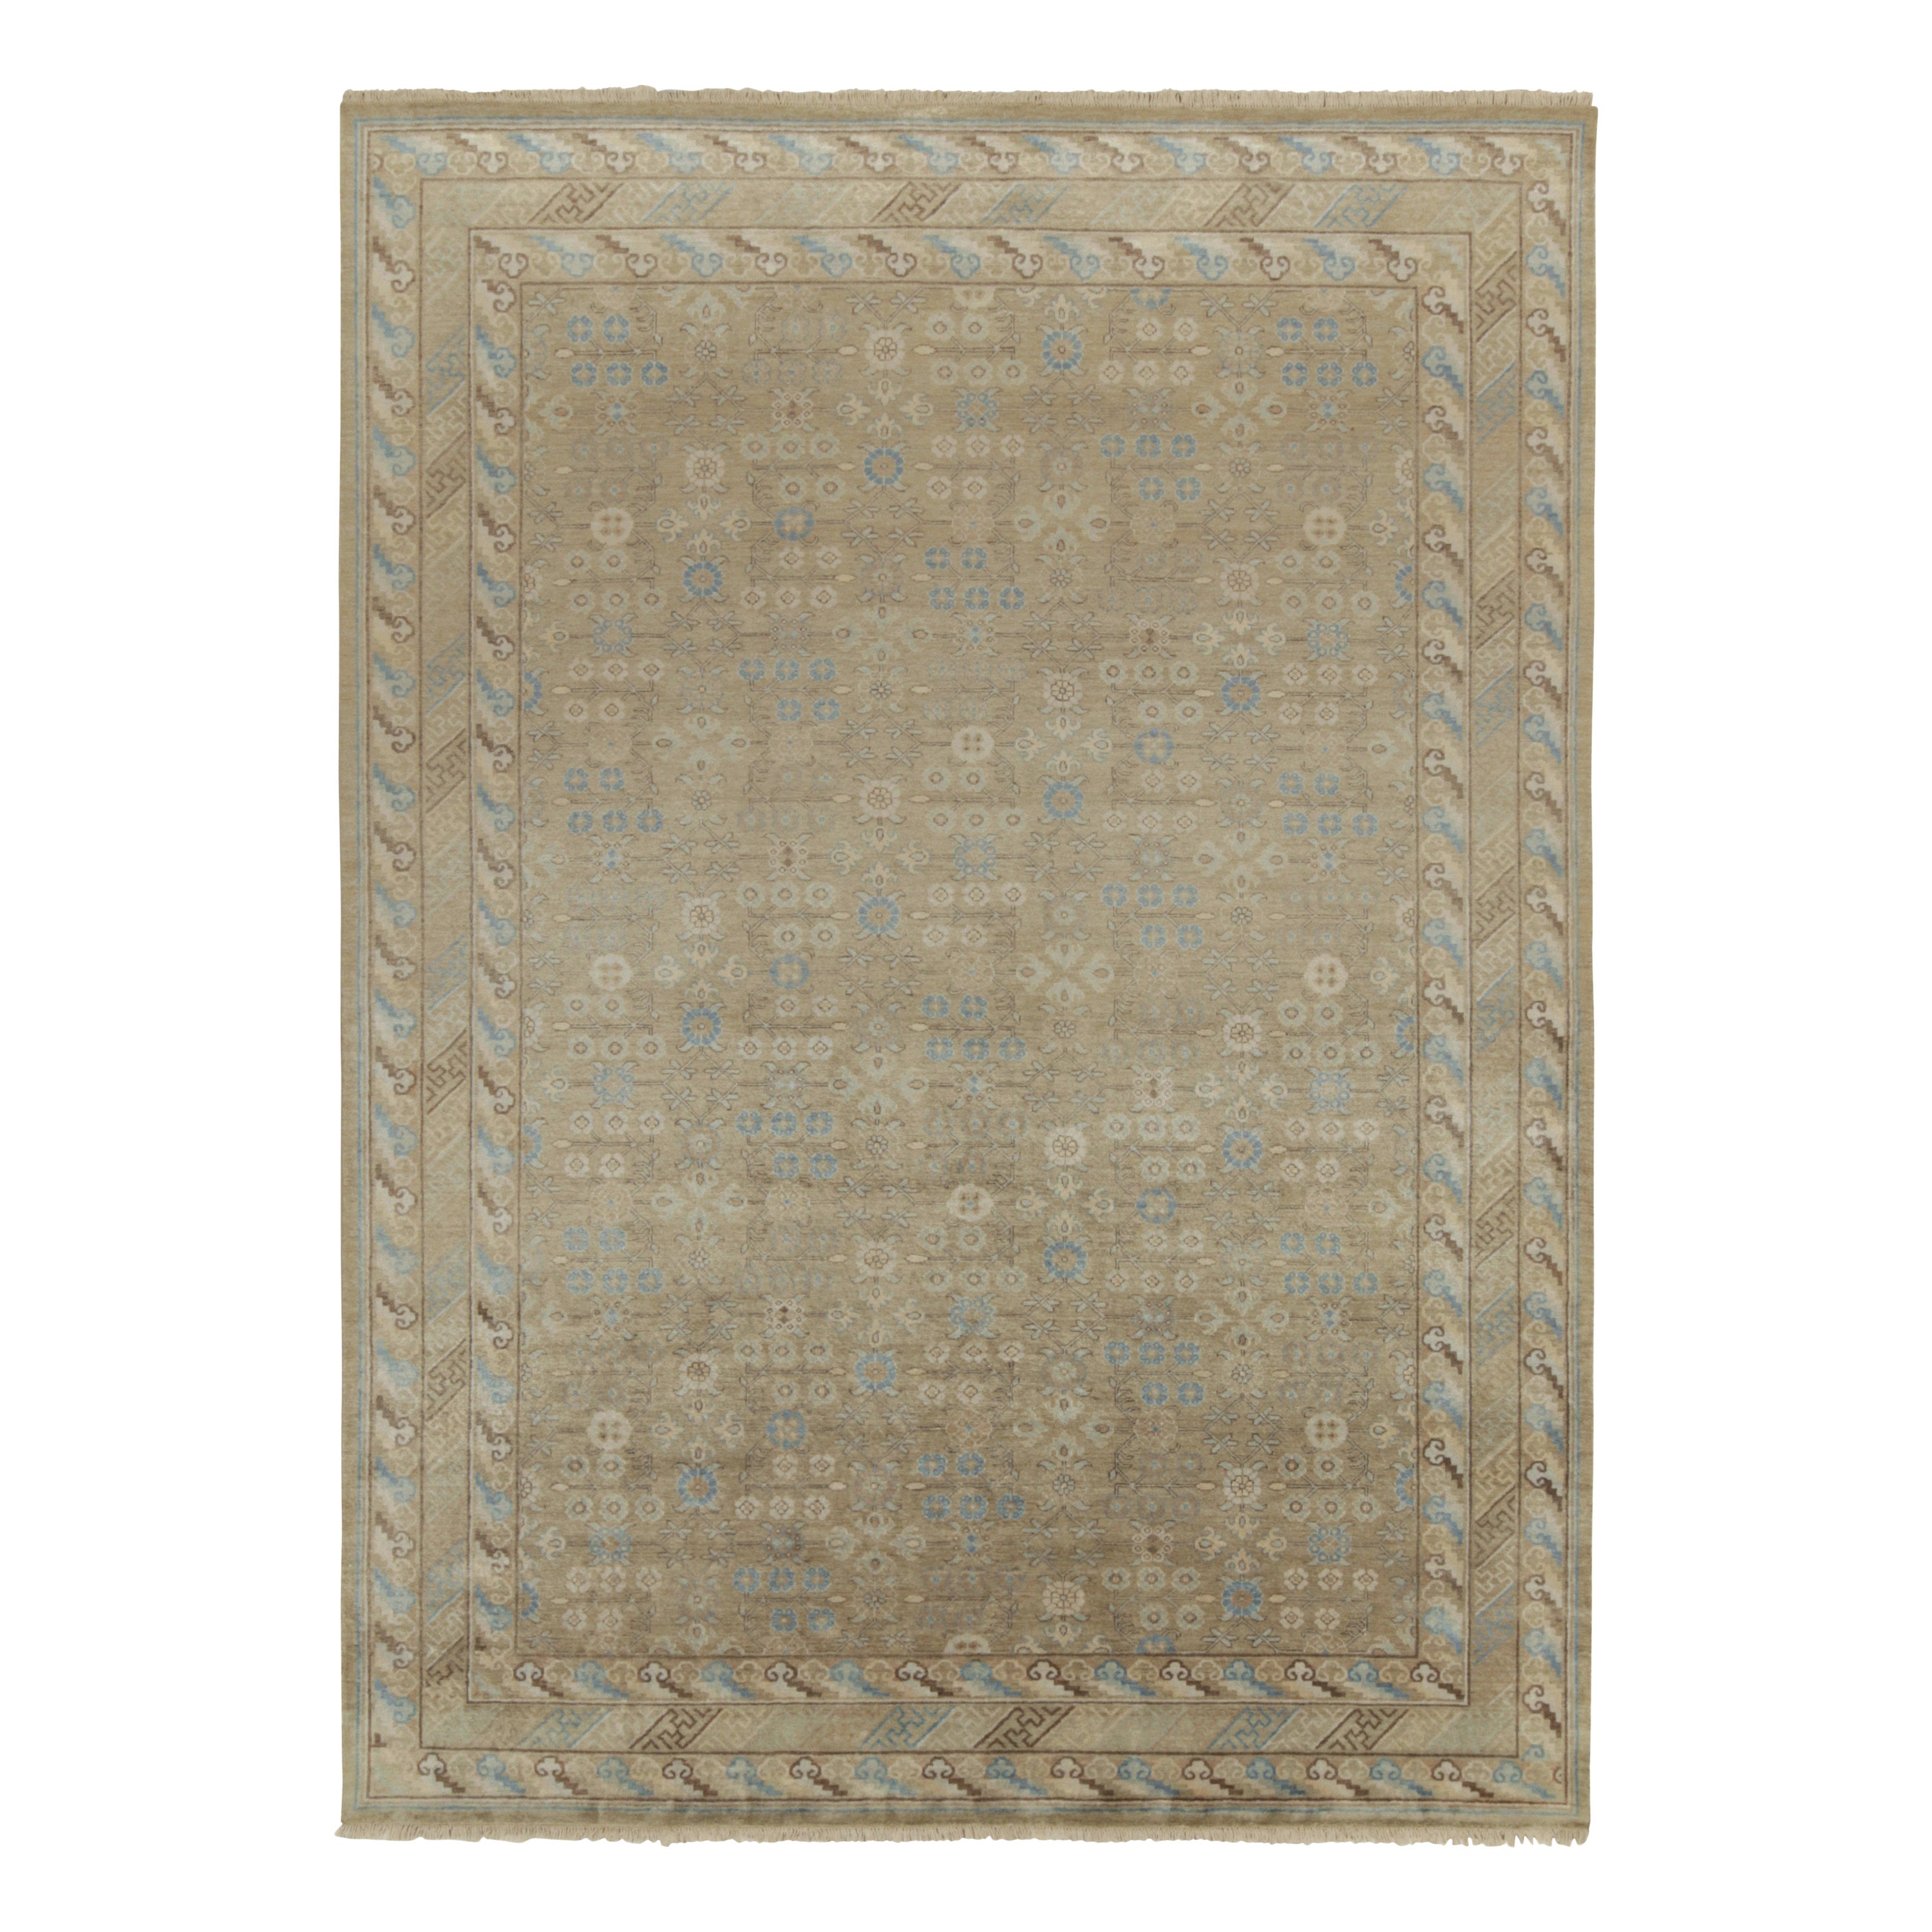 Rug & Kilim’s Khotan Style Rug in Gold, Beige-Brown and Blue Patterns For Sale